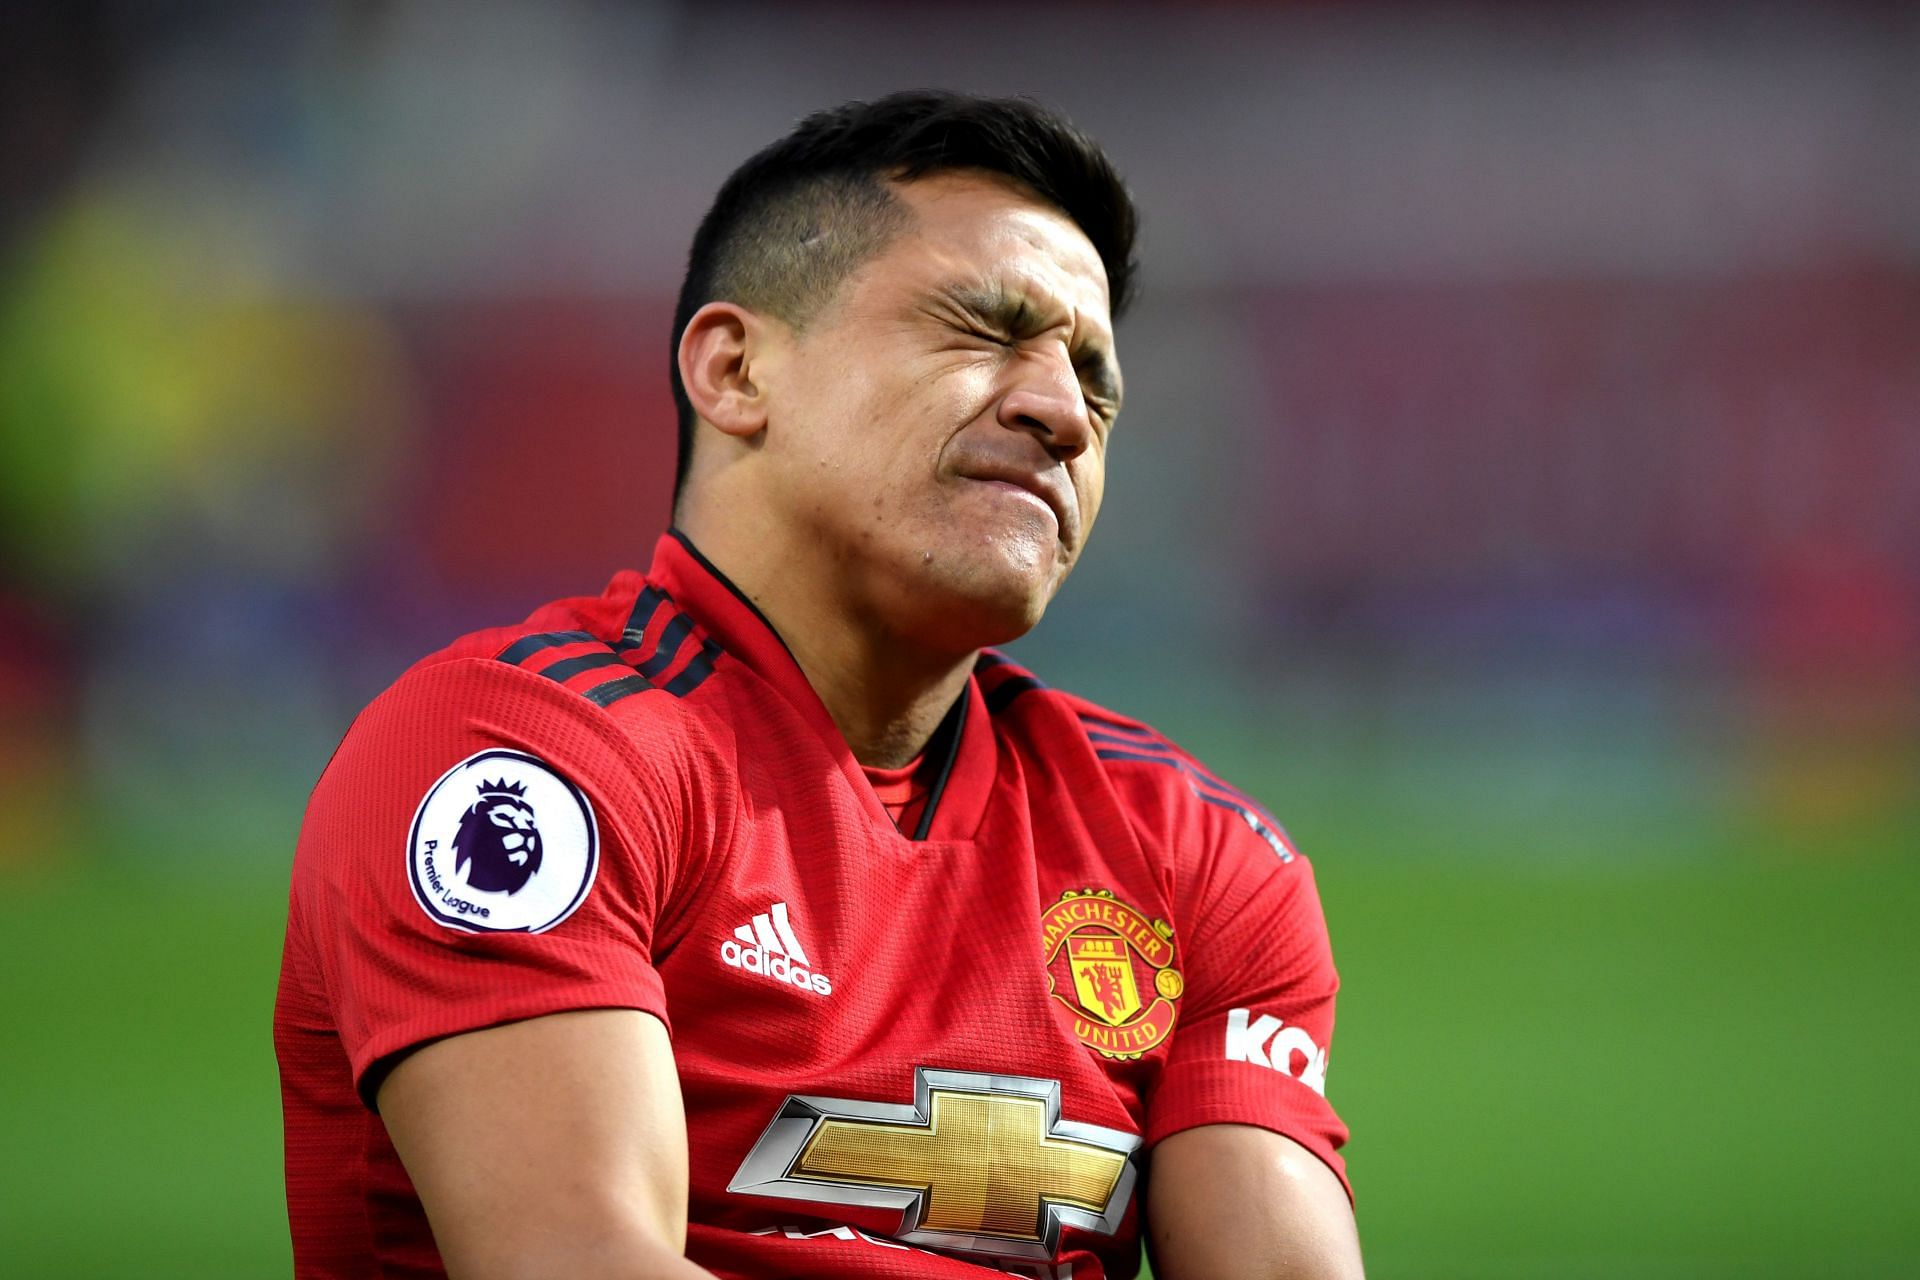 Alexis Sanchez suffered a torrid time at Manchester United